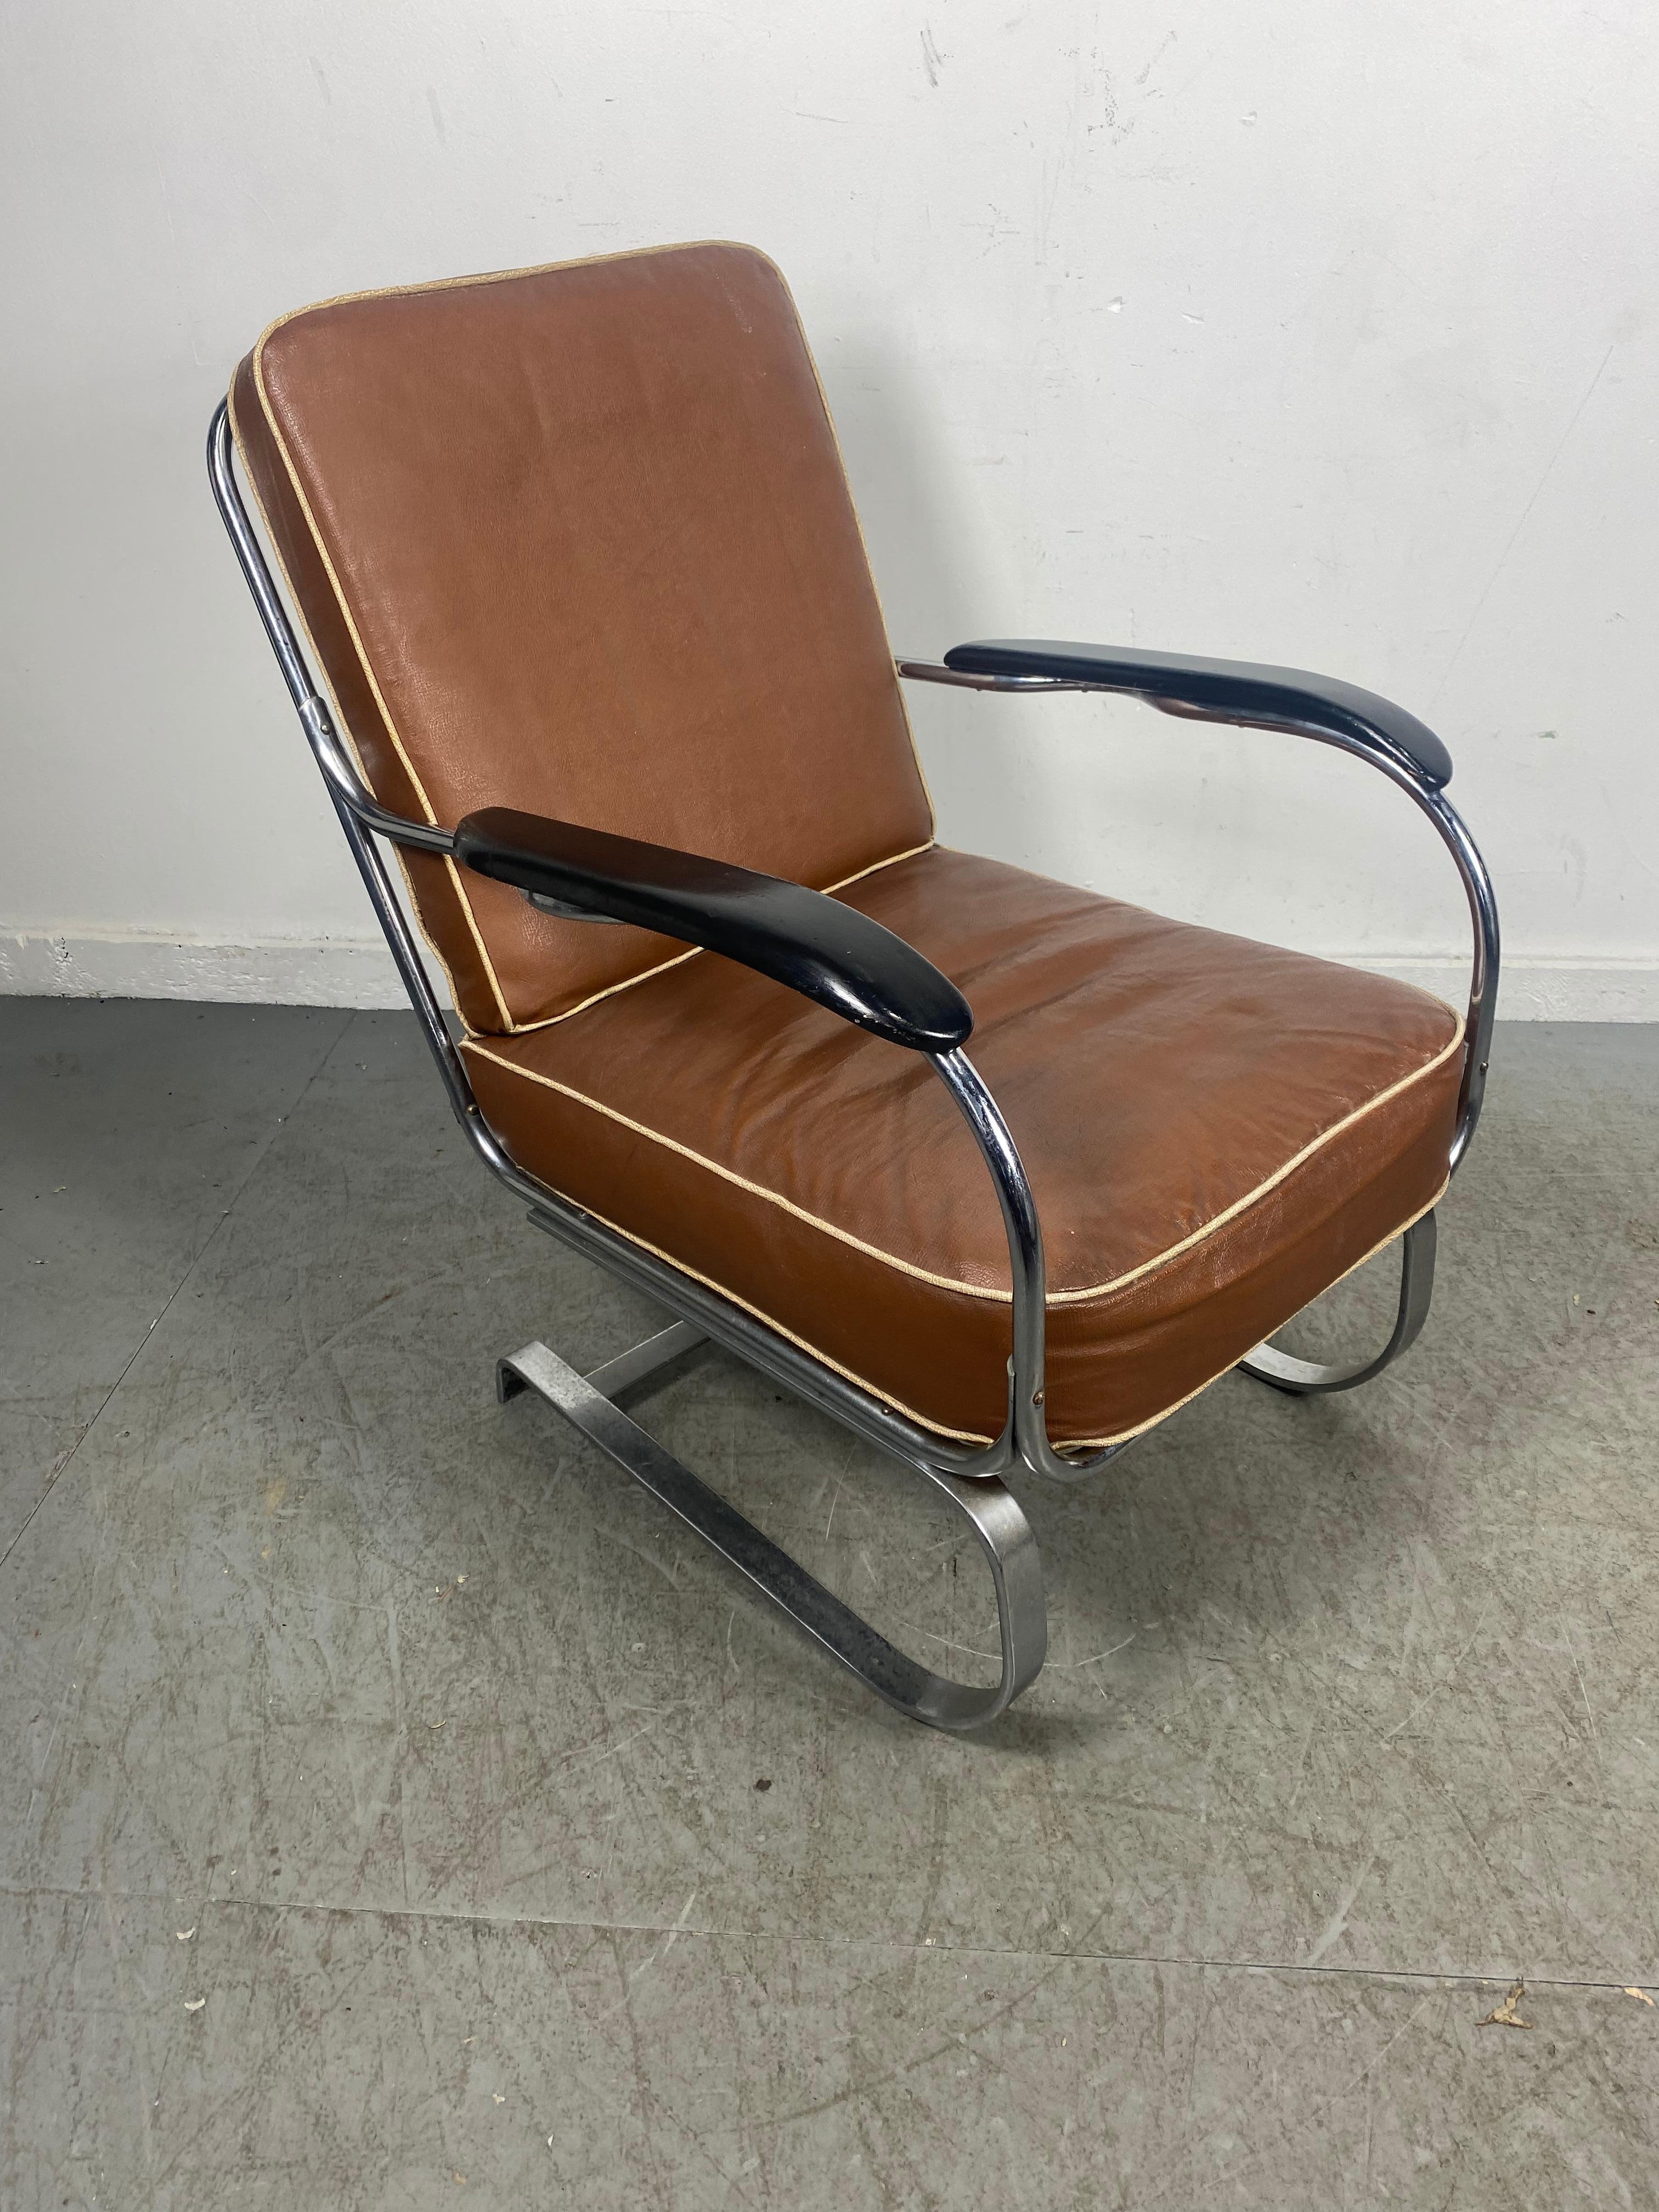 This extremely comfortable American Art Deco armchair was designed, circa 1935, for Lloyd Manufacturing by Karl Emmanuel Martin (KEM) Weber (1889 -1963).

Unmolested!! Totally original. A true surviver. Known as the “Springer” chair, the chairs